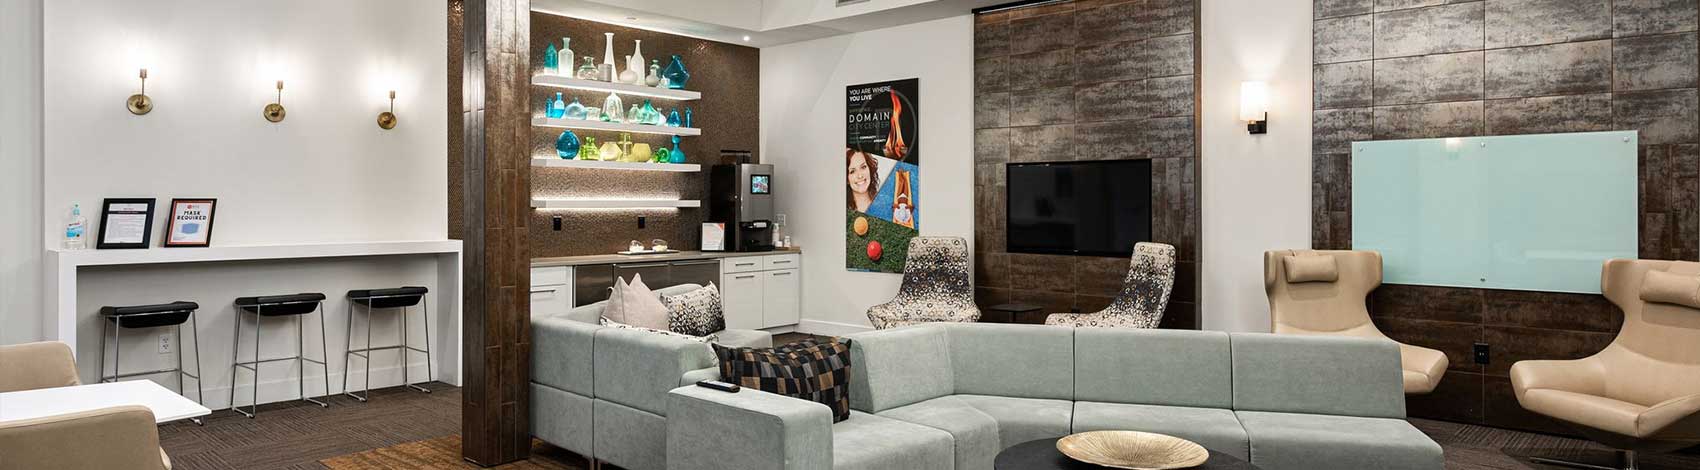 Residents Lounge with Large Sofabed and Wall-Mounted TV